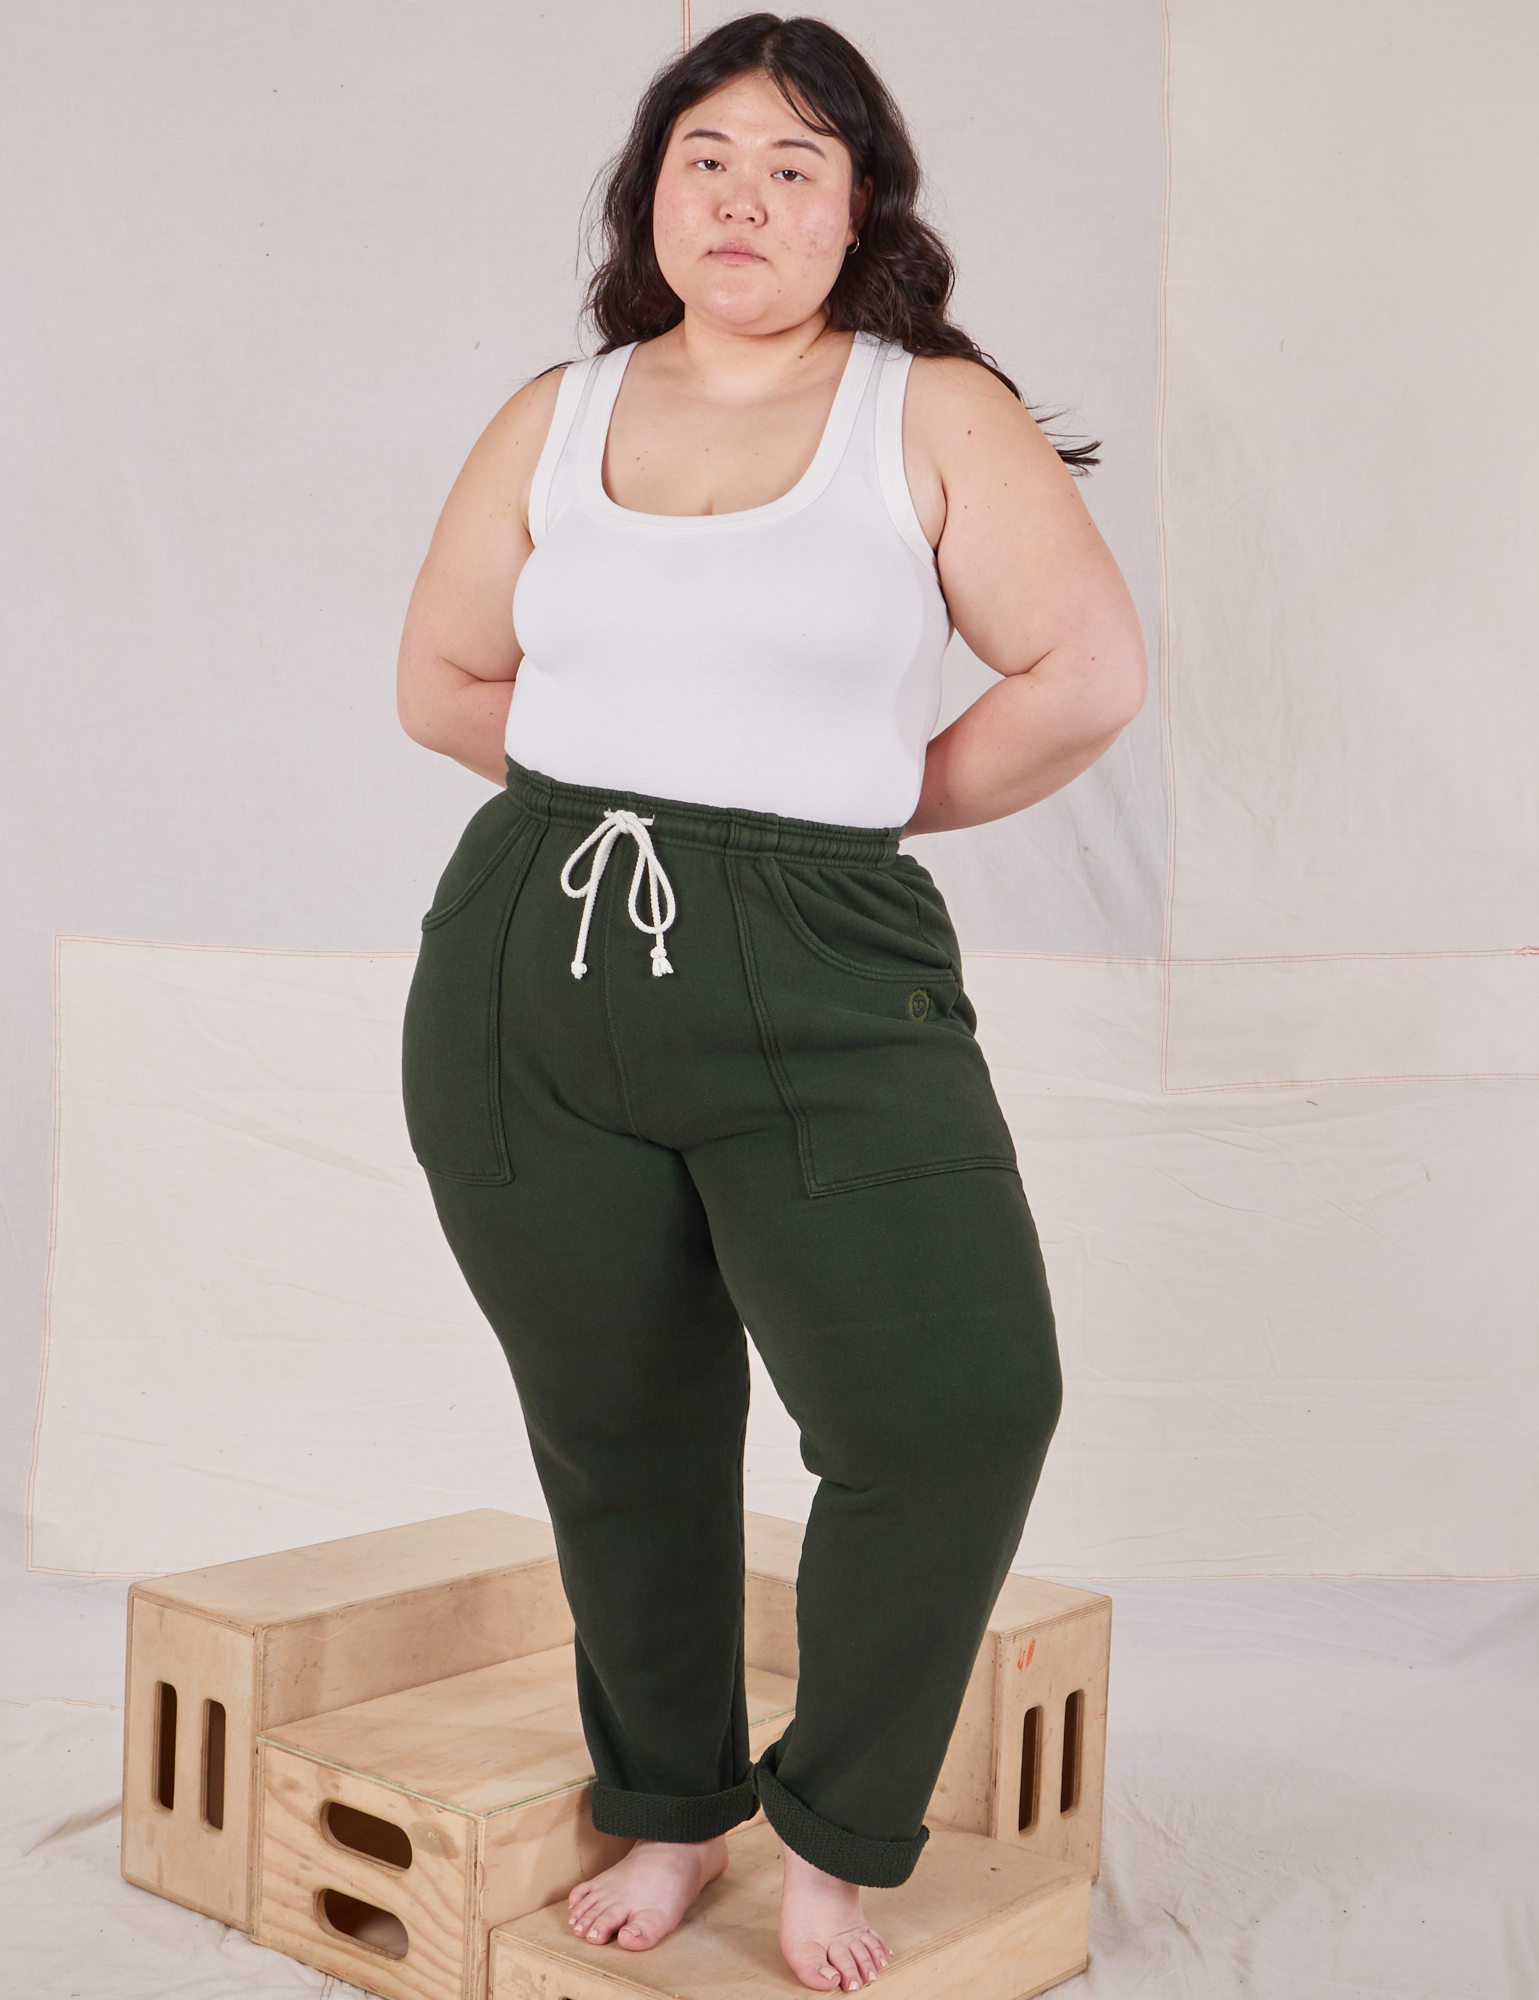 Ashley is 5&#39;7&quot; and wearing L Rolled Cuff Sweat Pants in Swamp Green and Cropped Tank in vintage tee off-white 